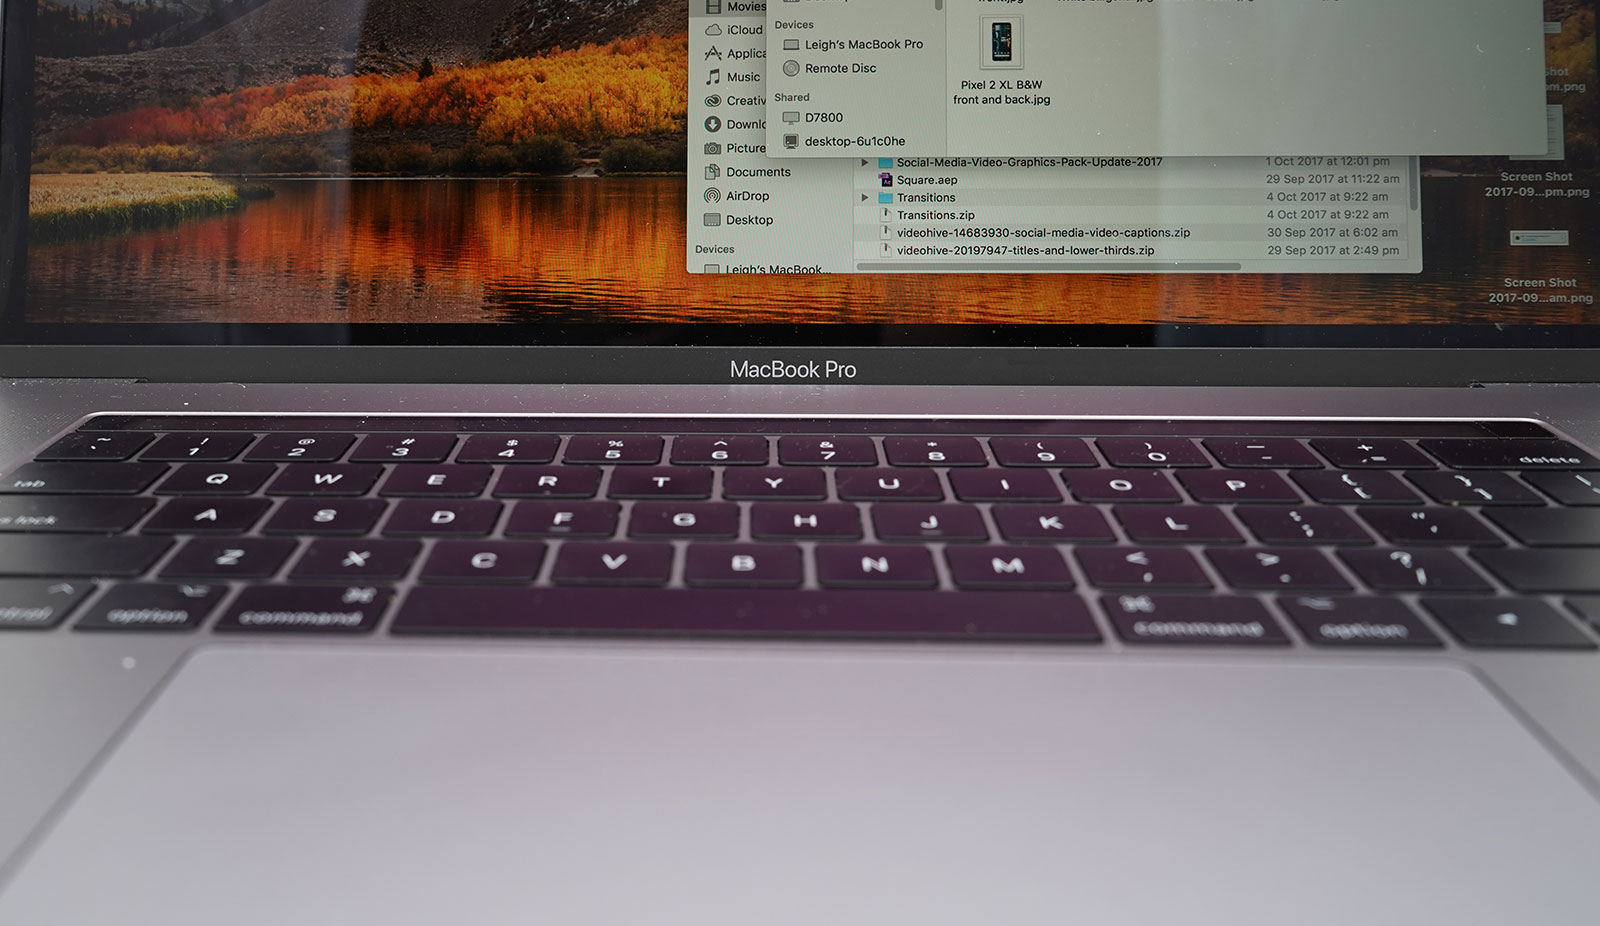 MacBook Pro with Touch Bar Review (15-inch) - Full Review and